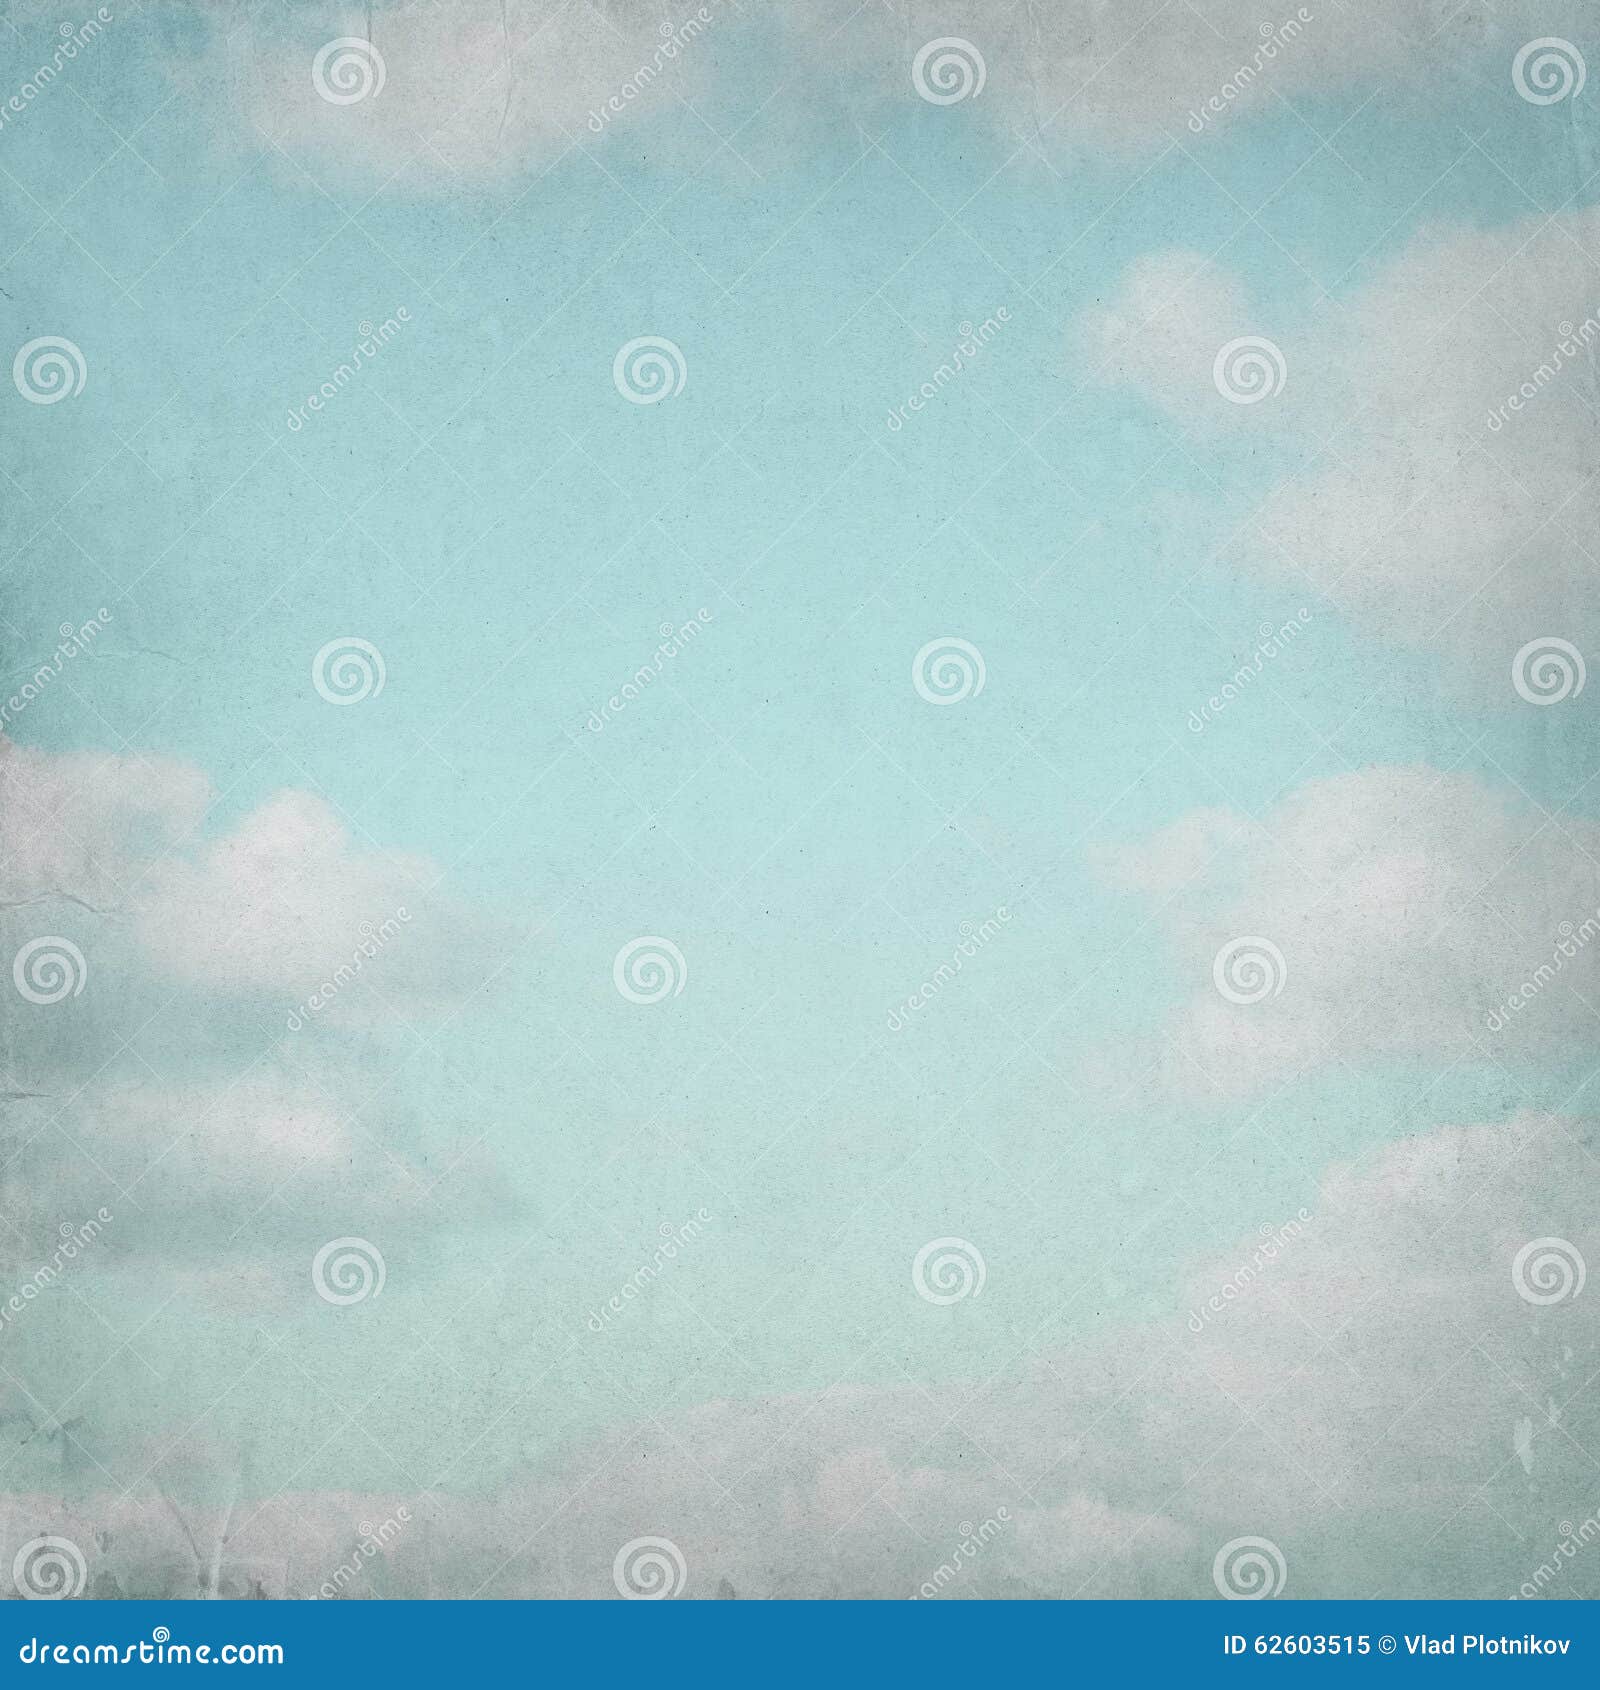 Old Paper Background with Blue Sky Stock Image - Image of cloudscape ...